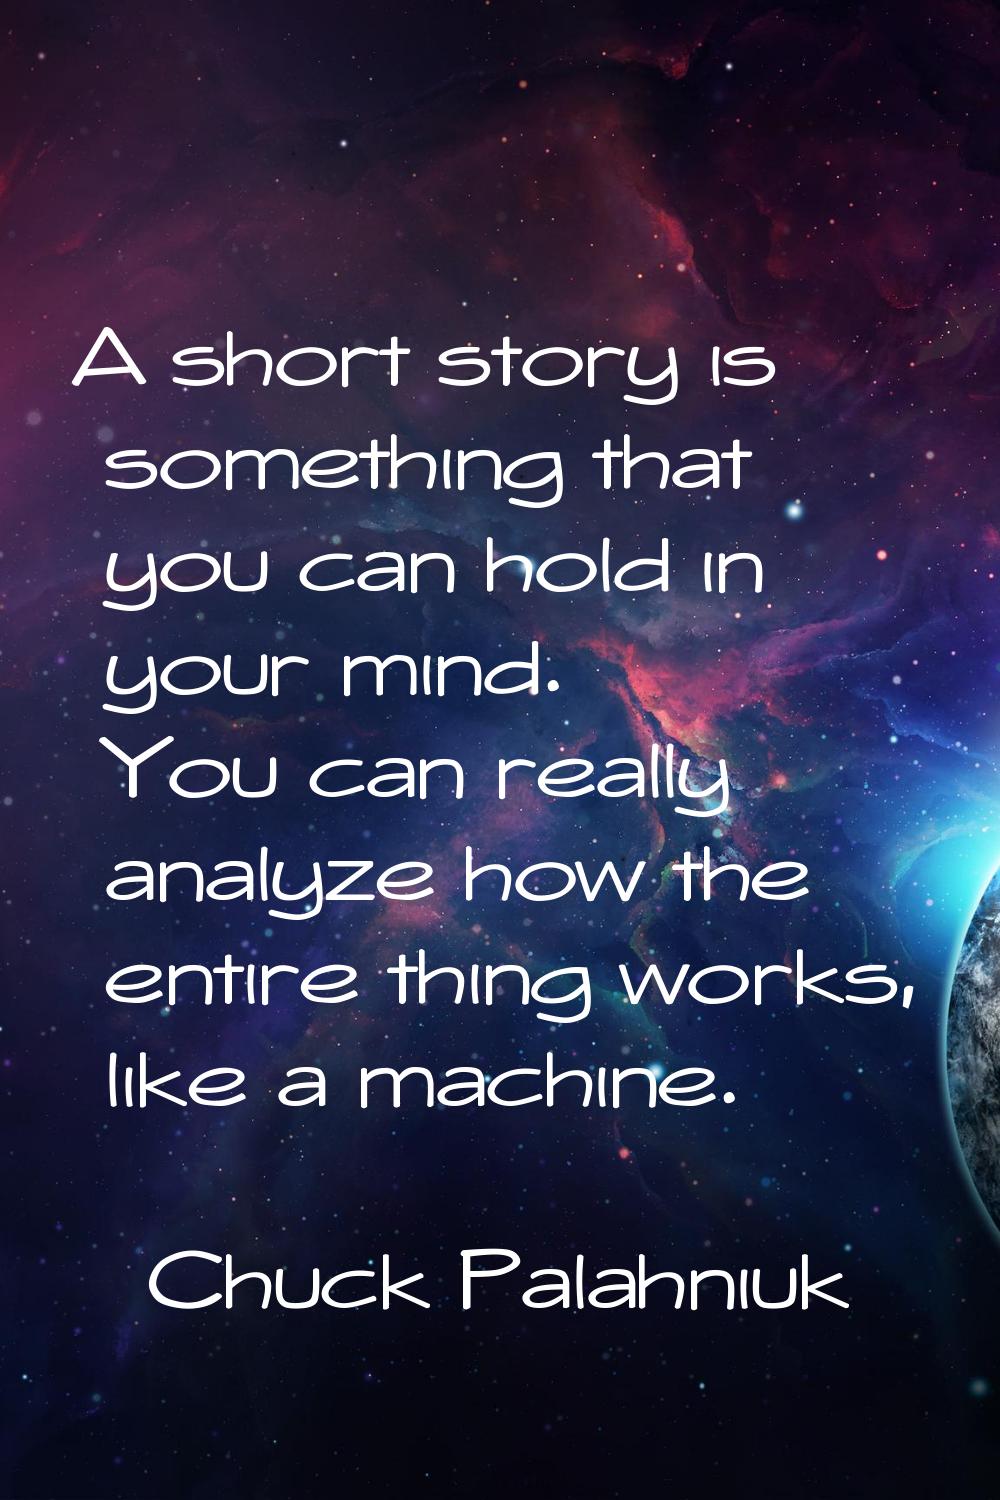 A short story is something that you can hold in your mind. You can really analyze how the entire th